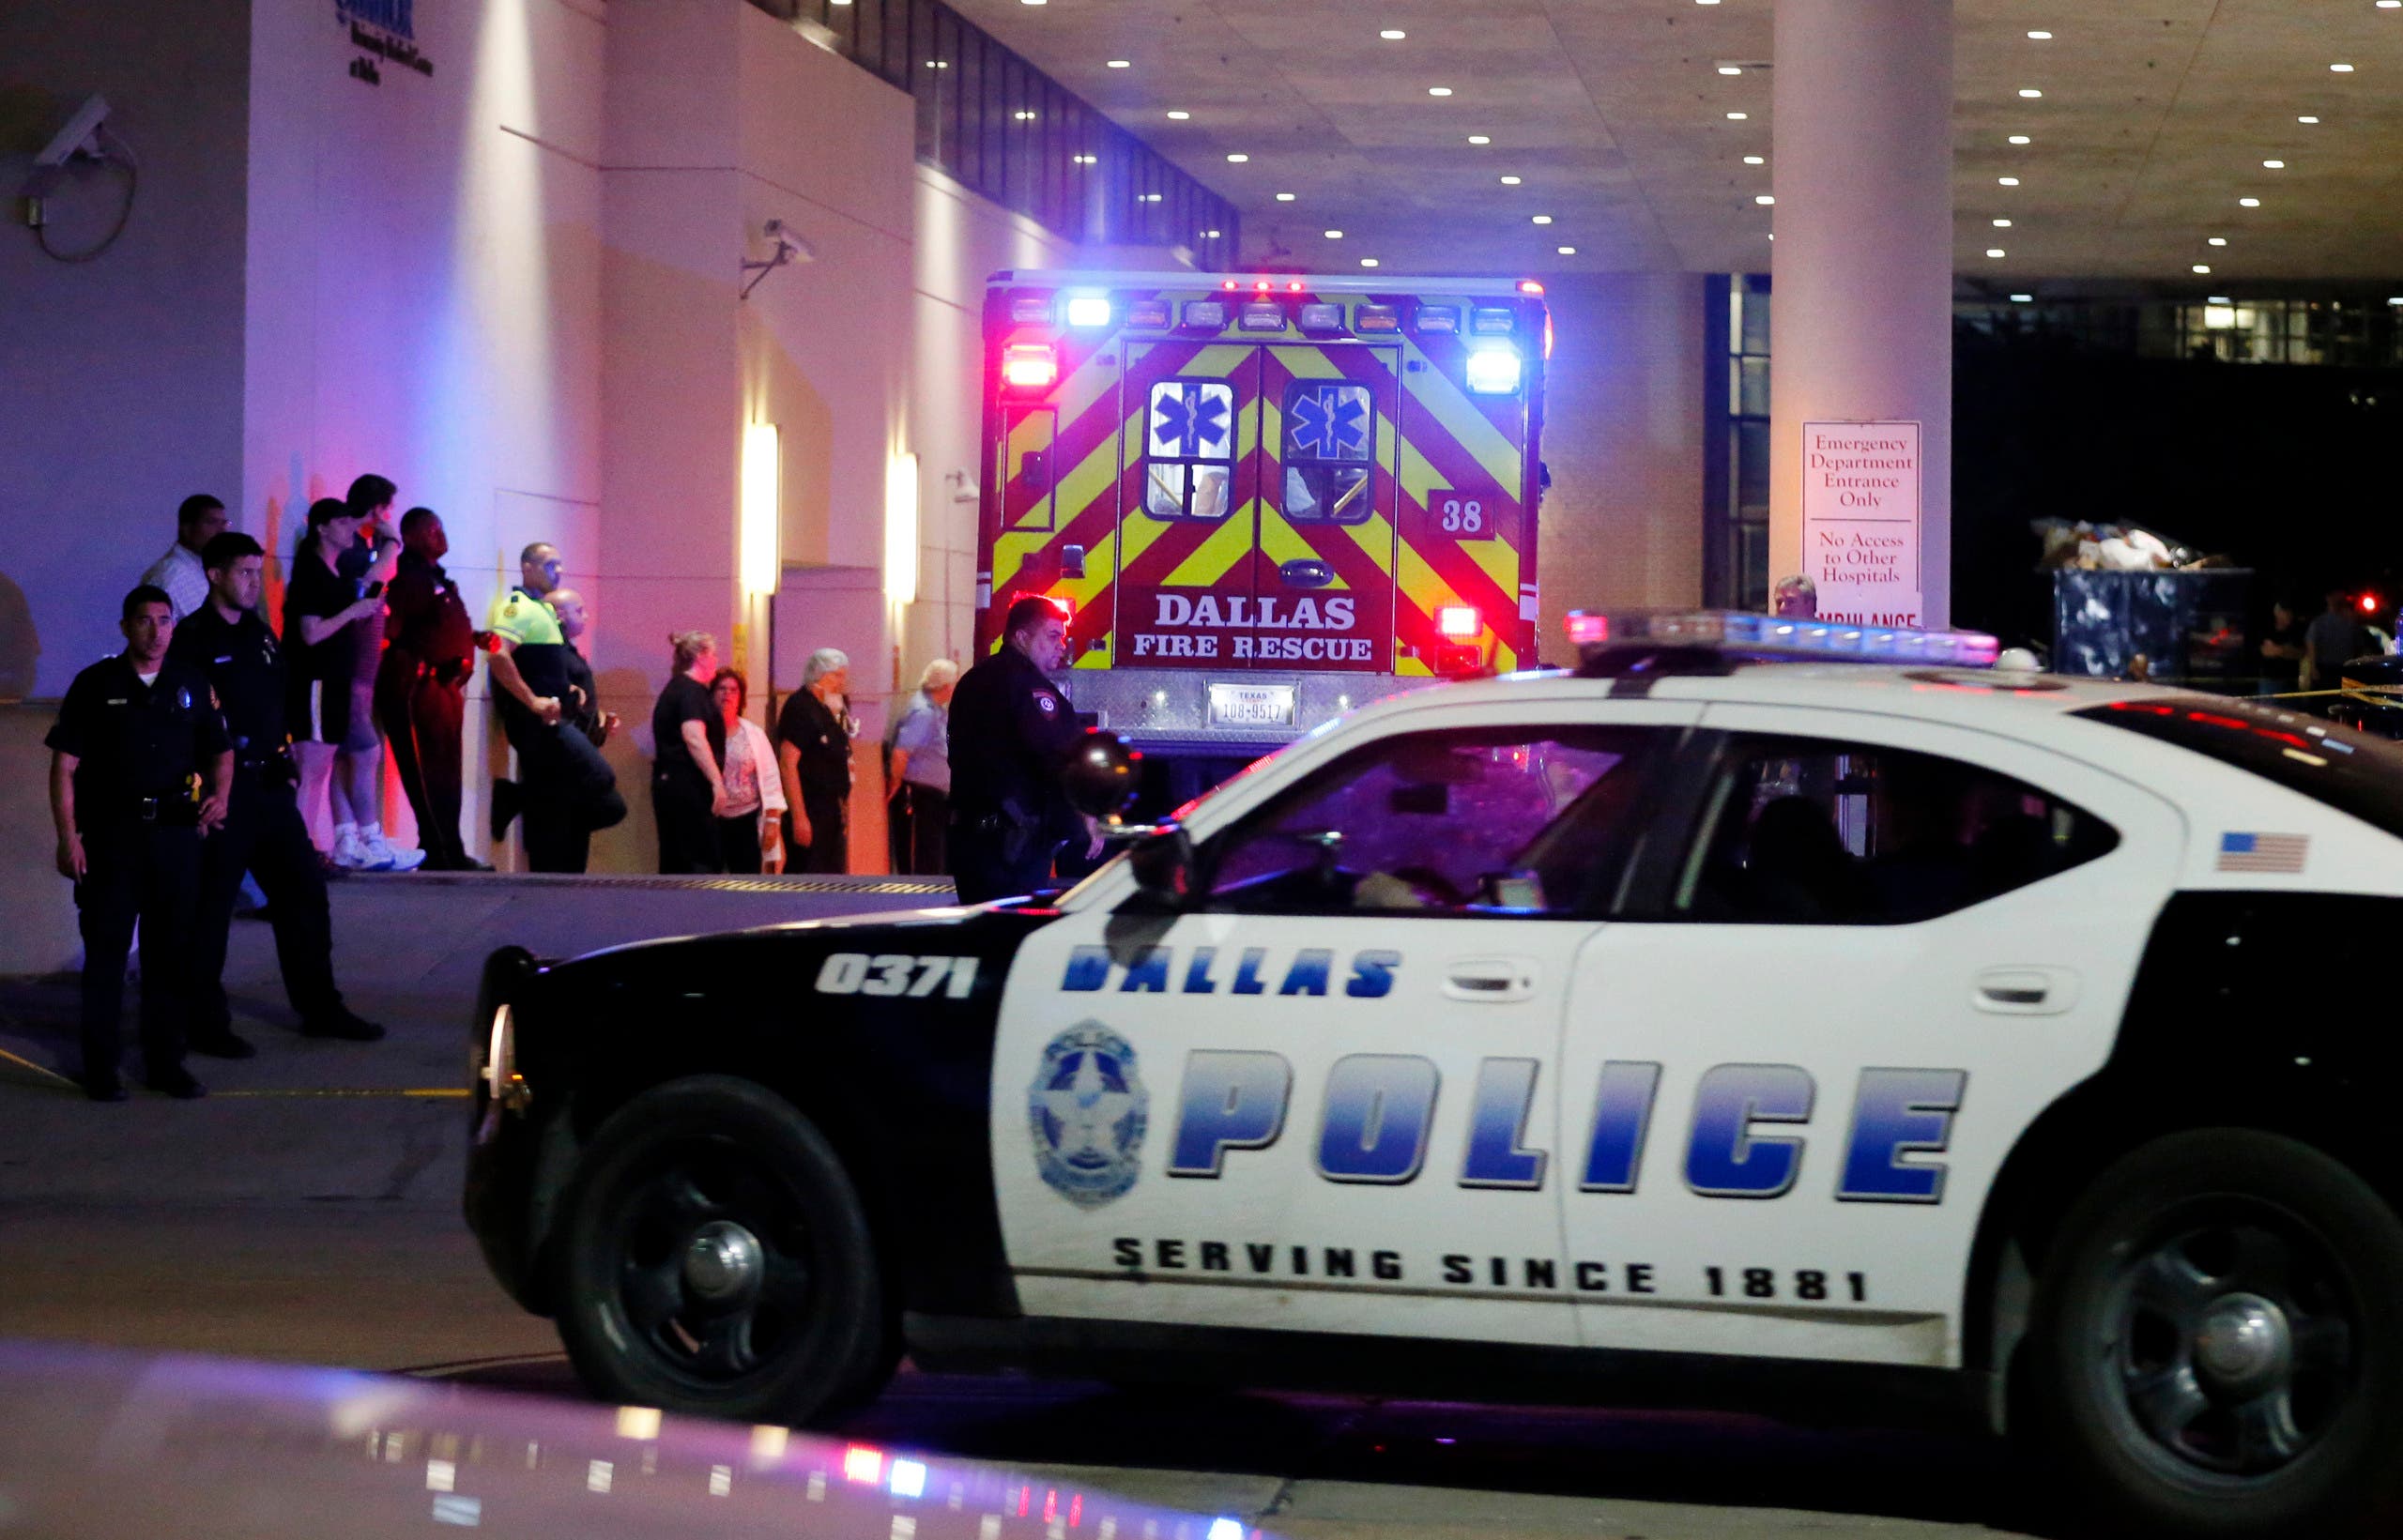 A Dallas police vehicle follows behind an ambulance carrying a patient to the emergency department at Baylor University Medical Center, as police and others stand near the emergency entrance early Friday, July 8, 2016, in Dallas. (AP)